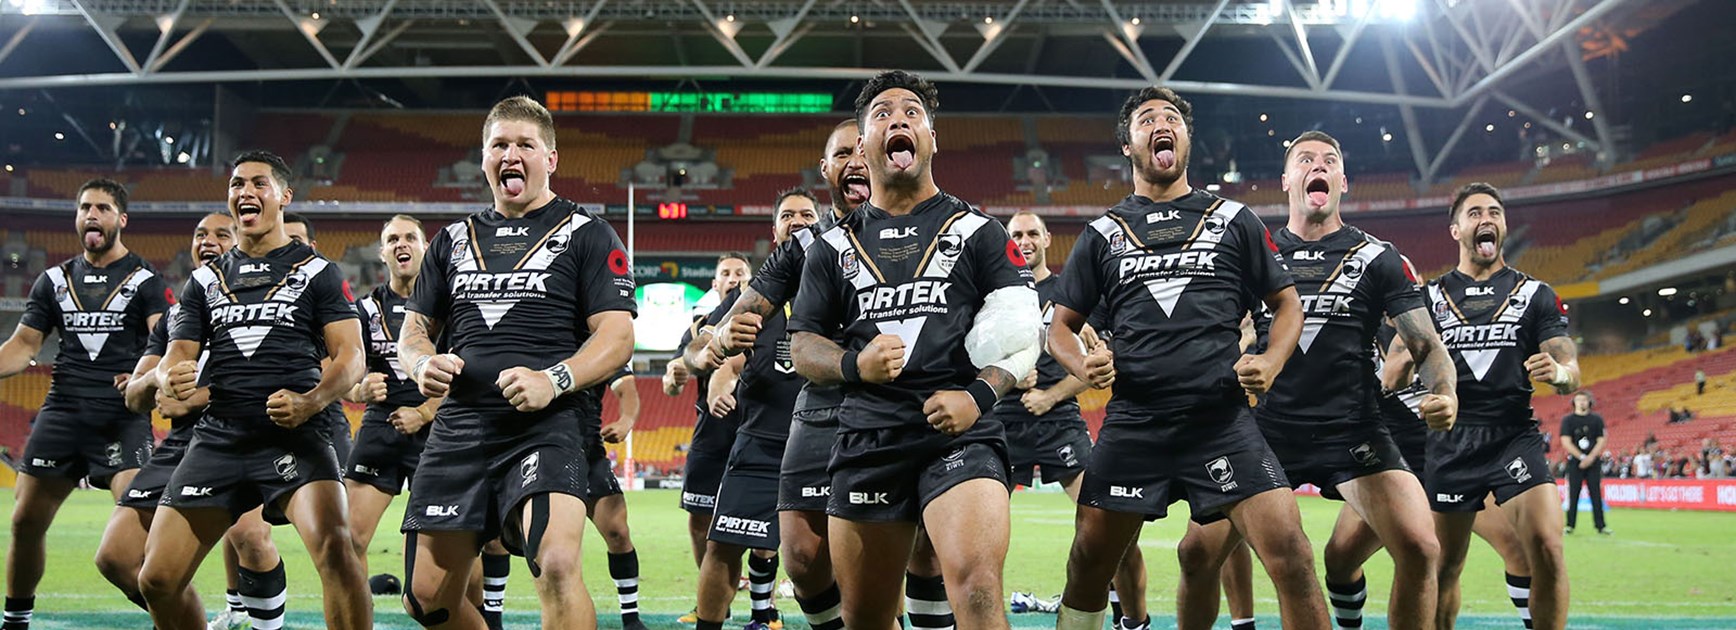 Kiwis celebrate with a post-match haka following their win over the Kangaroos in Brisbane.